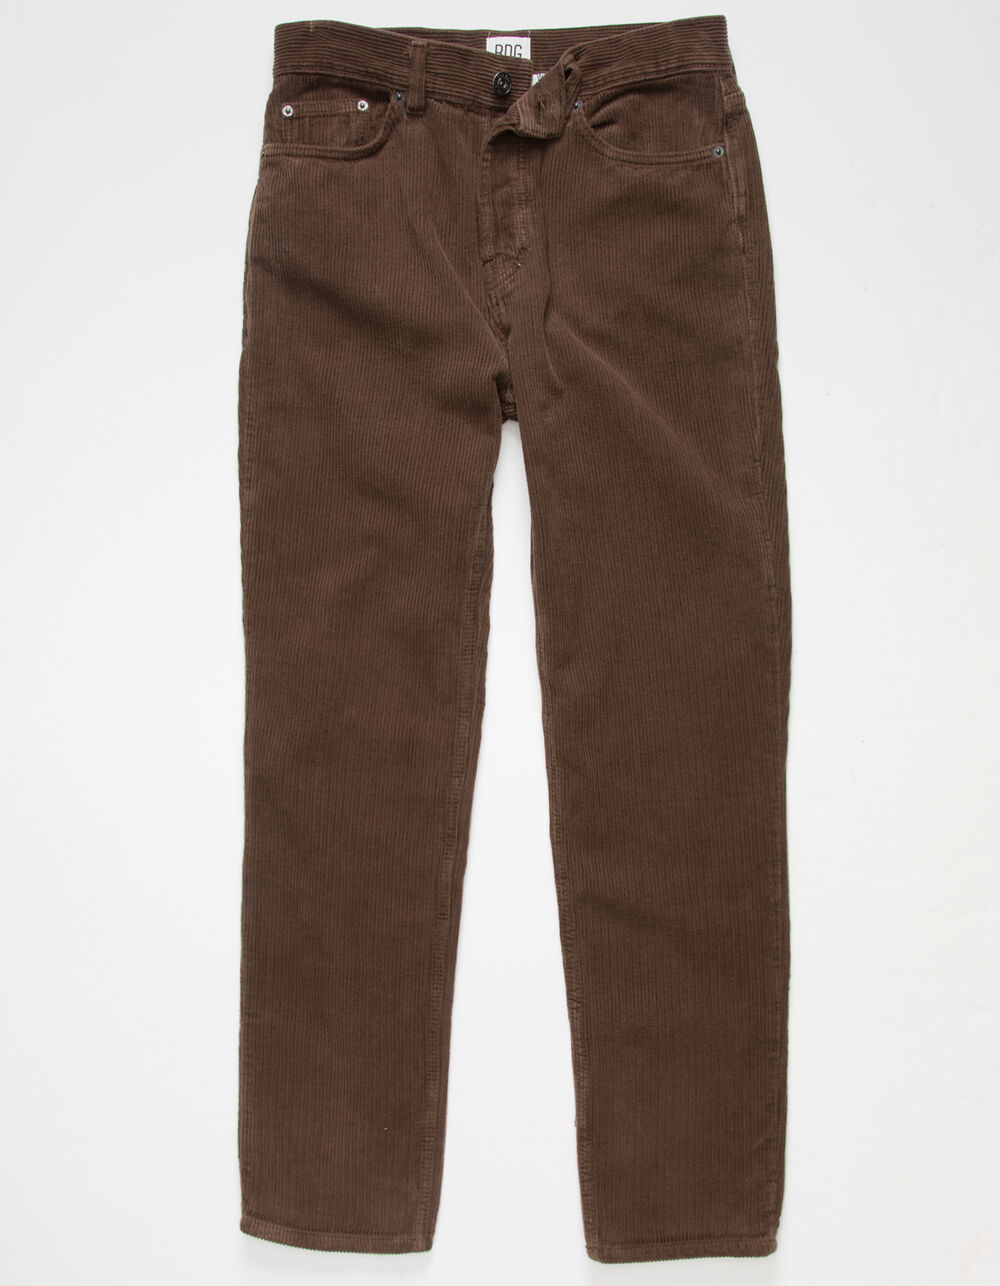 Urban Outfitters BDG Brown Corduroy Cargo Men's Trousers Size W26 L30  RRP:59£!